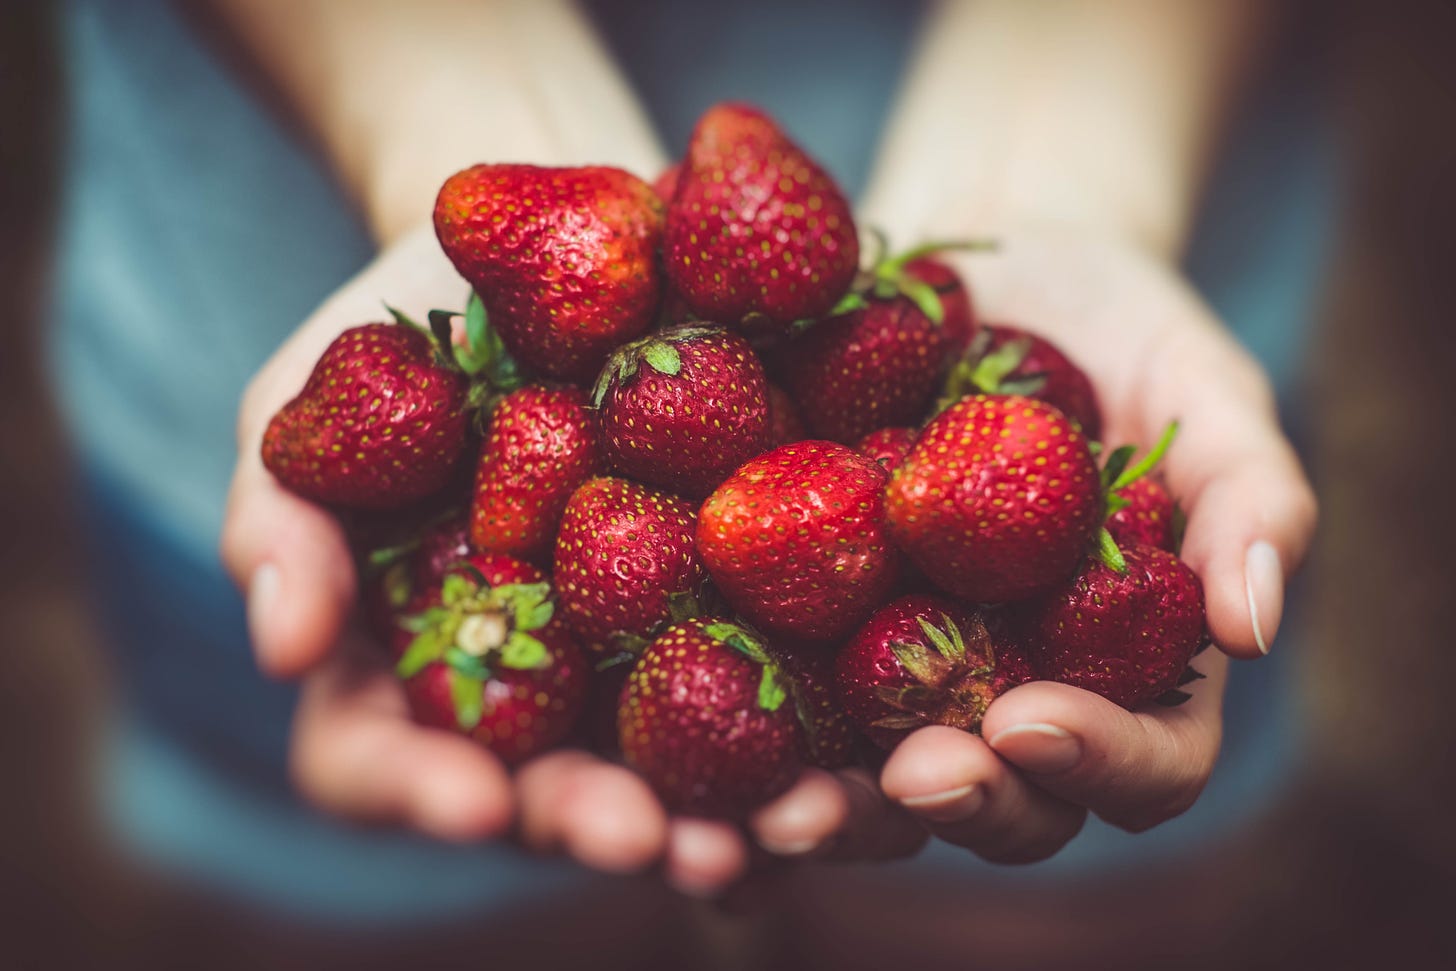 two hands holding a bunch of ripe red strawberries